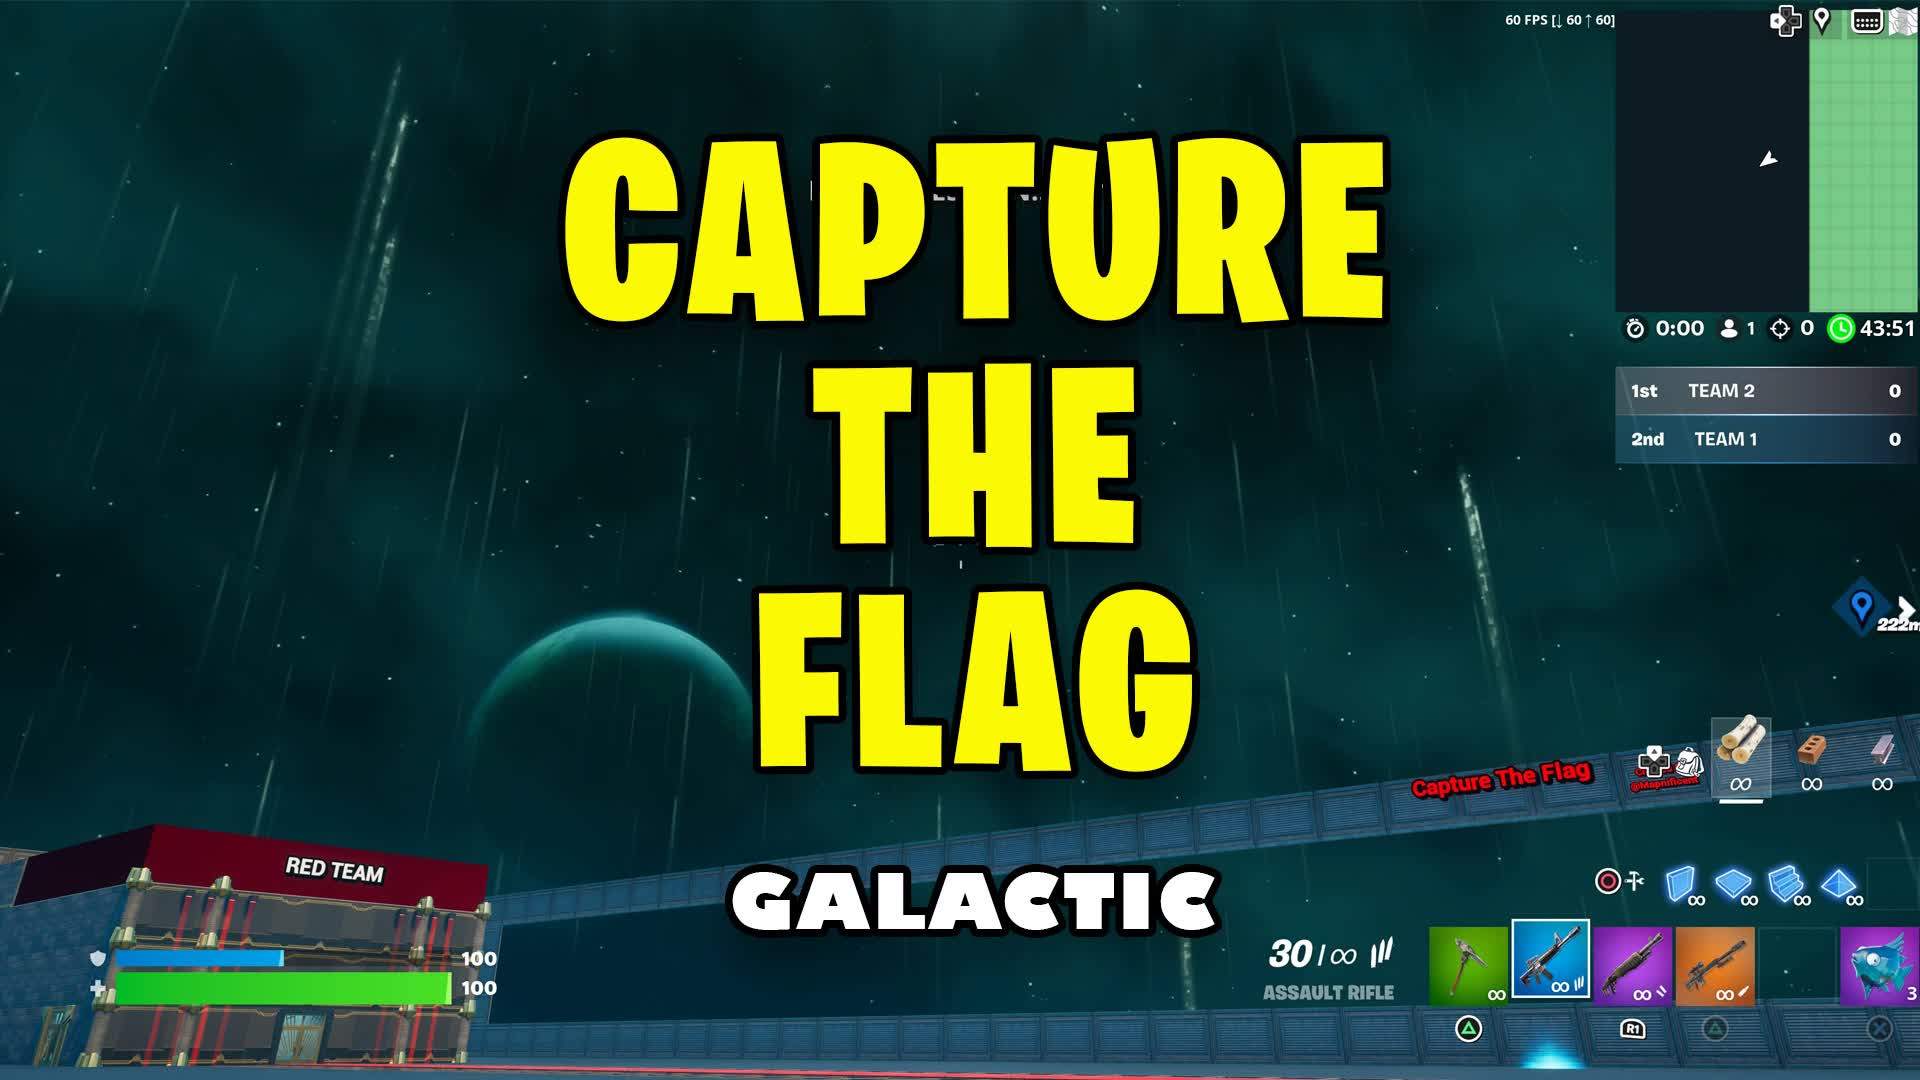 CAPTURE THE FLAG - GALACTIC